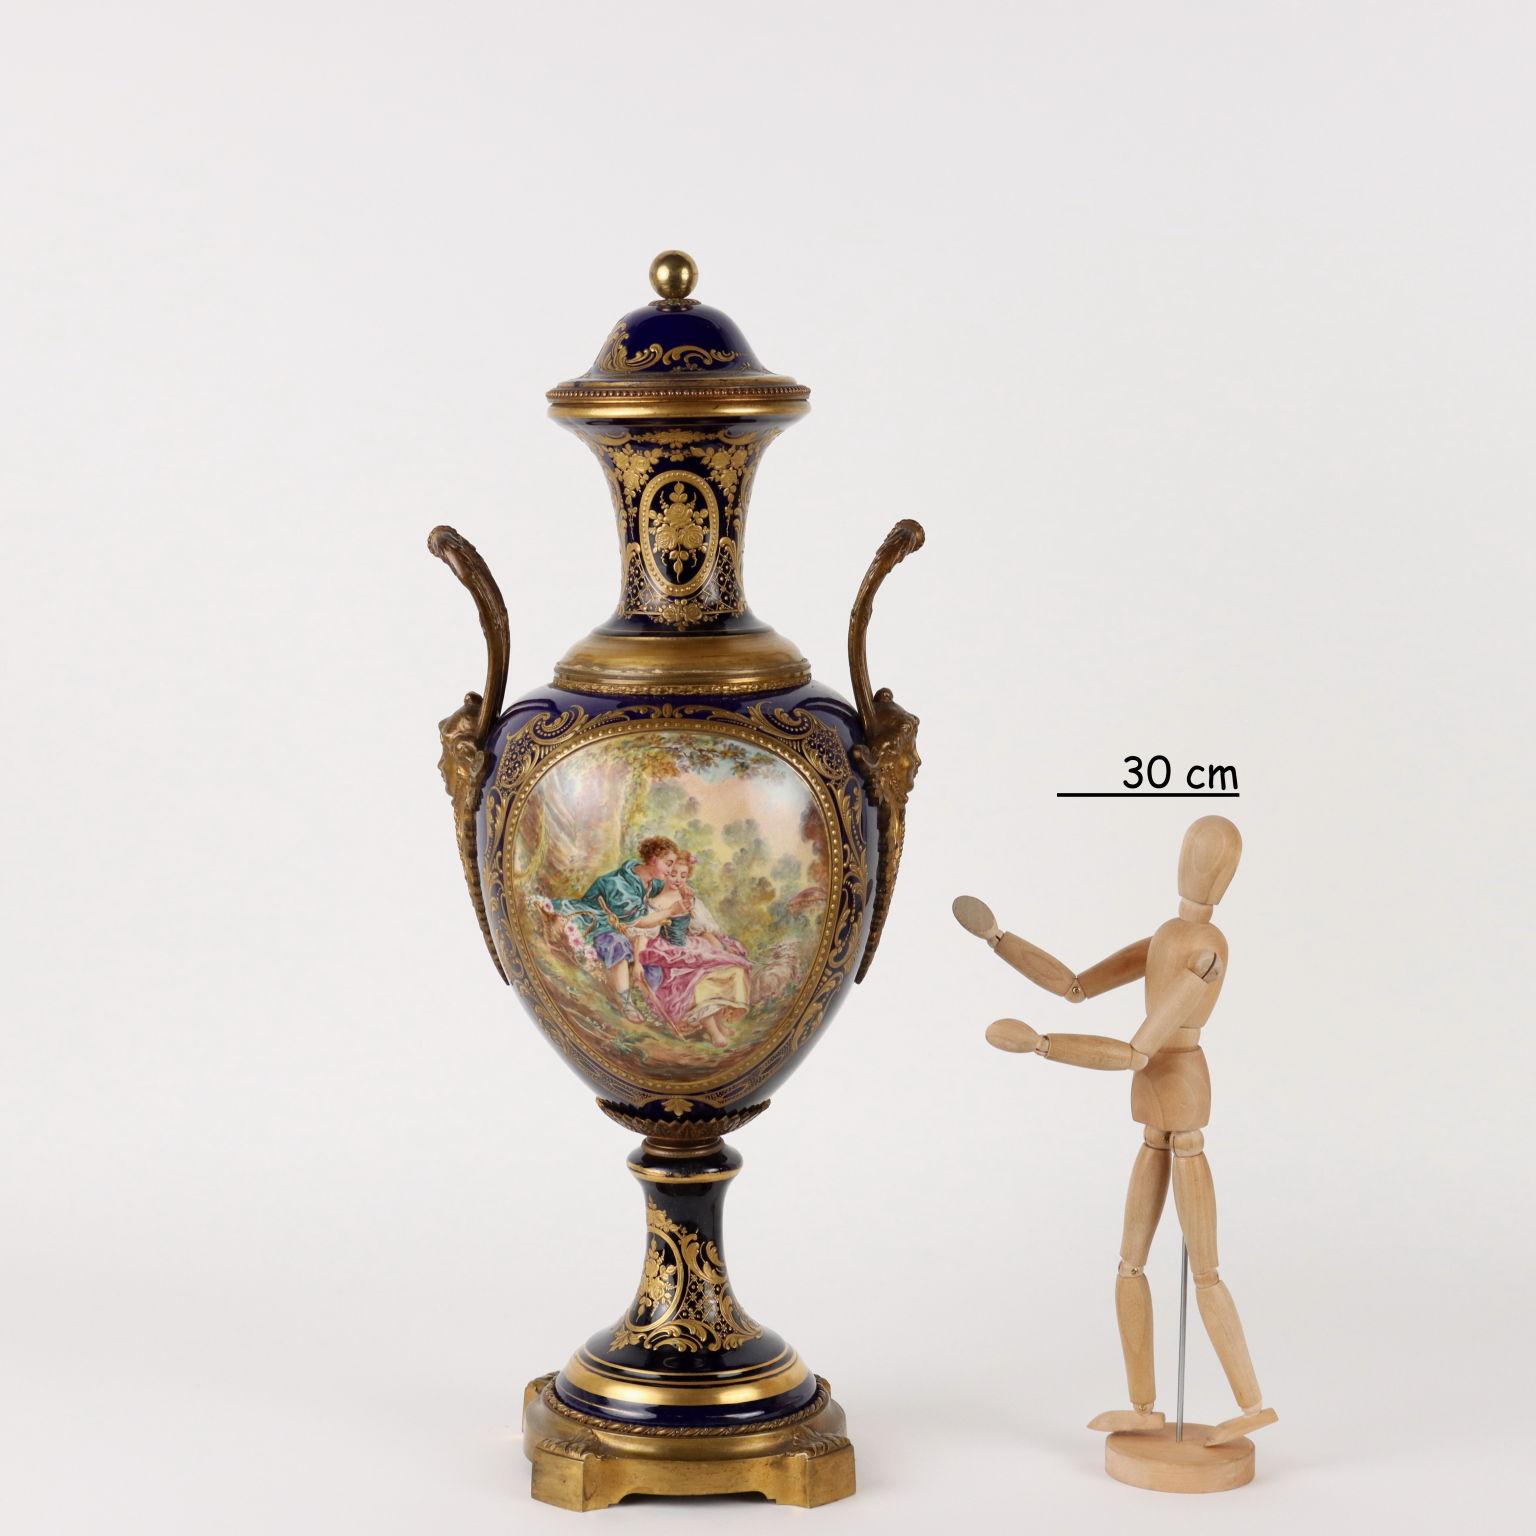 Cobalt blue ceramic vase mounted on gilt bronze with female-headed handles. Rich gold decorations with leafy scrolls and plant motifs. In the reserves there are paintings with an amorous scene and a lake landscape.